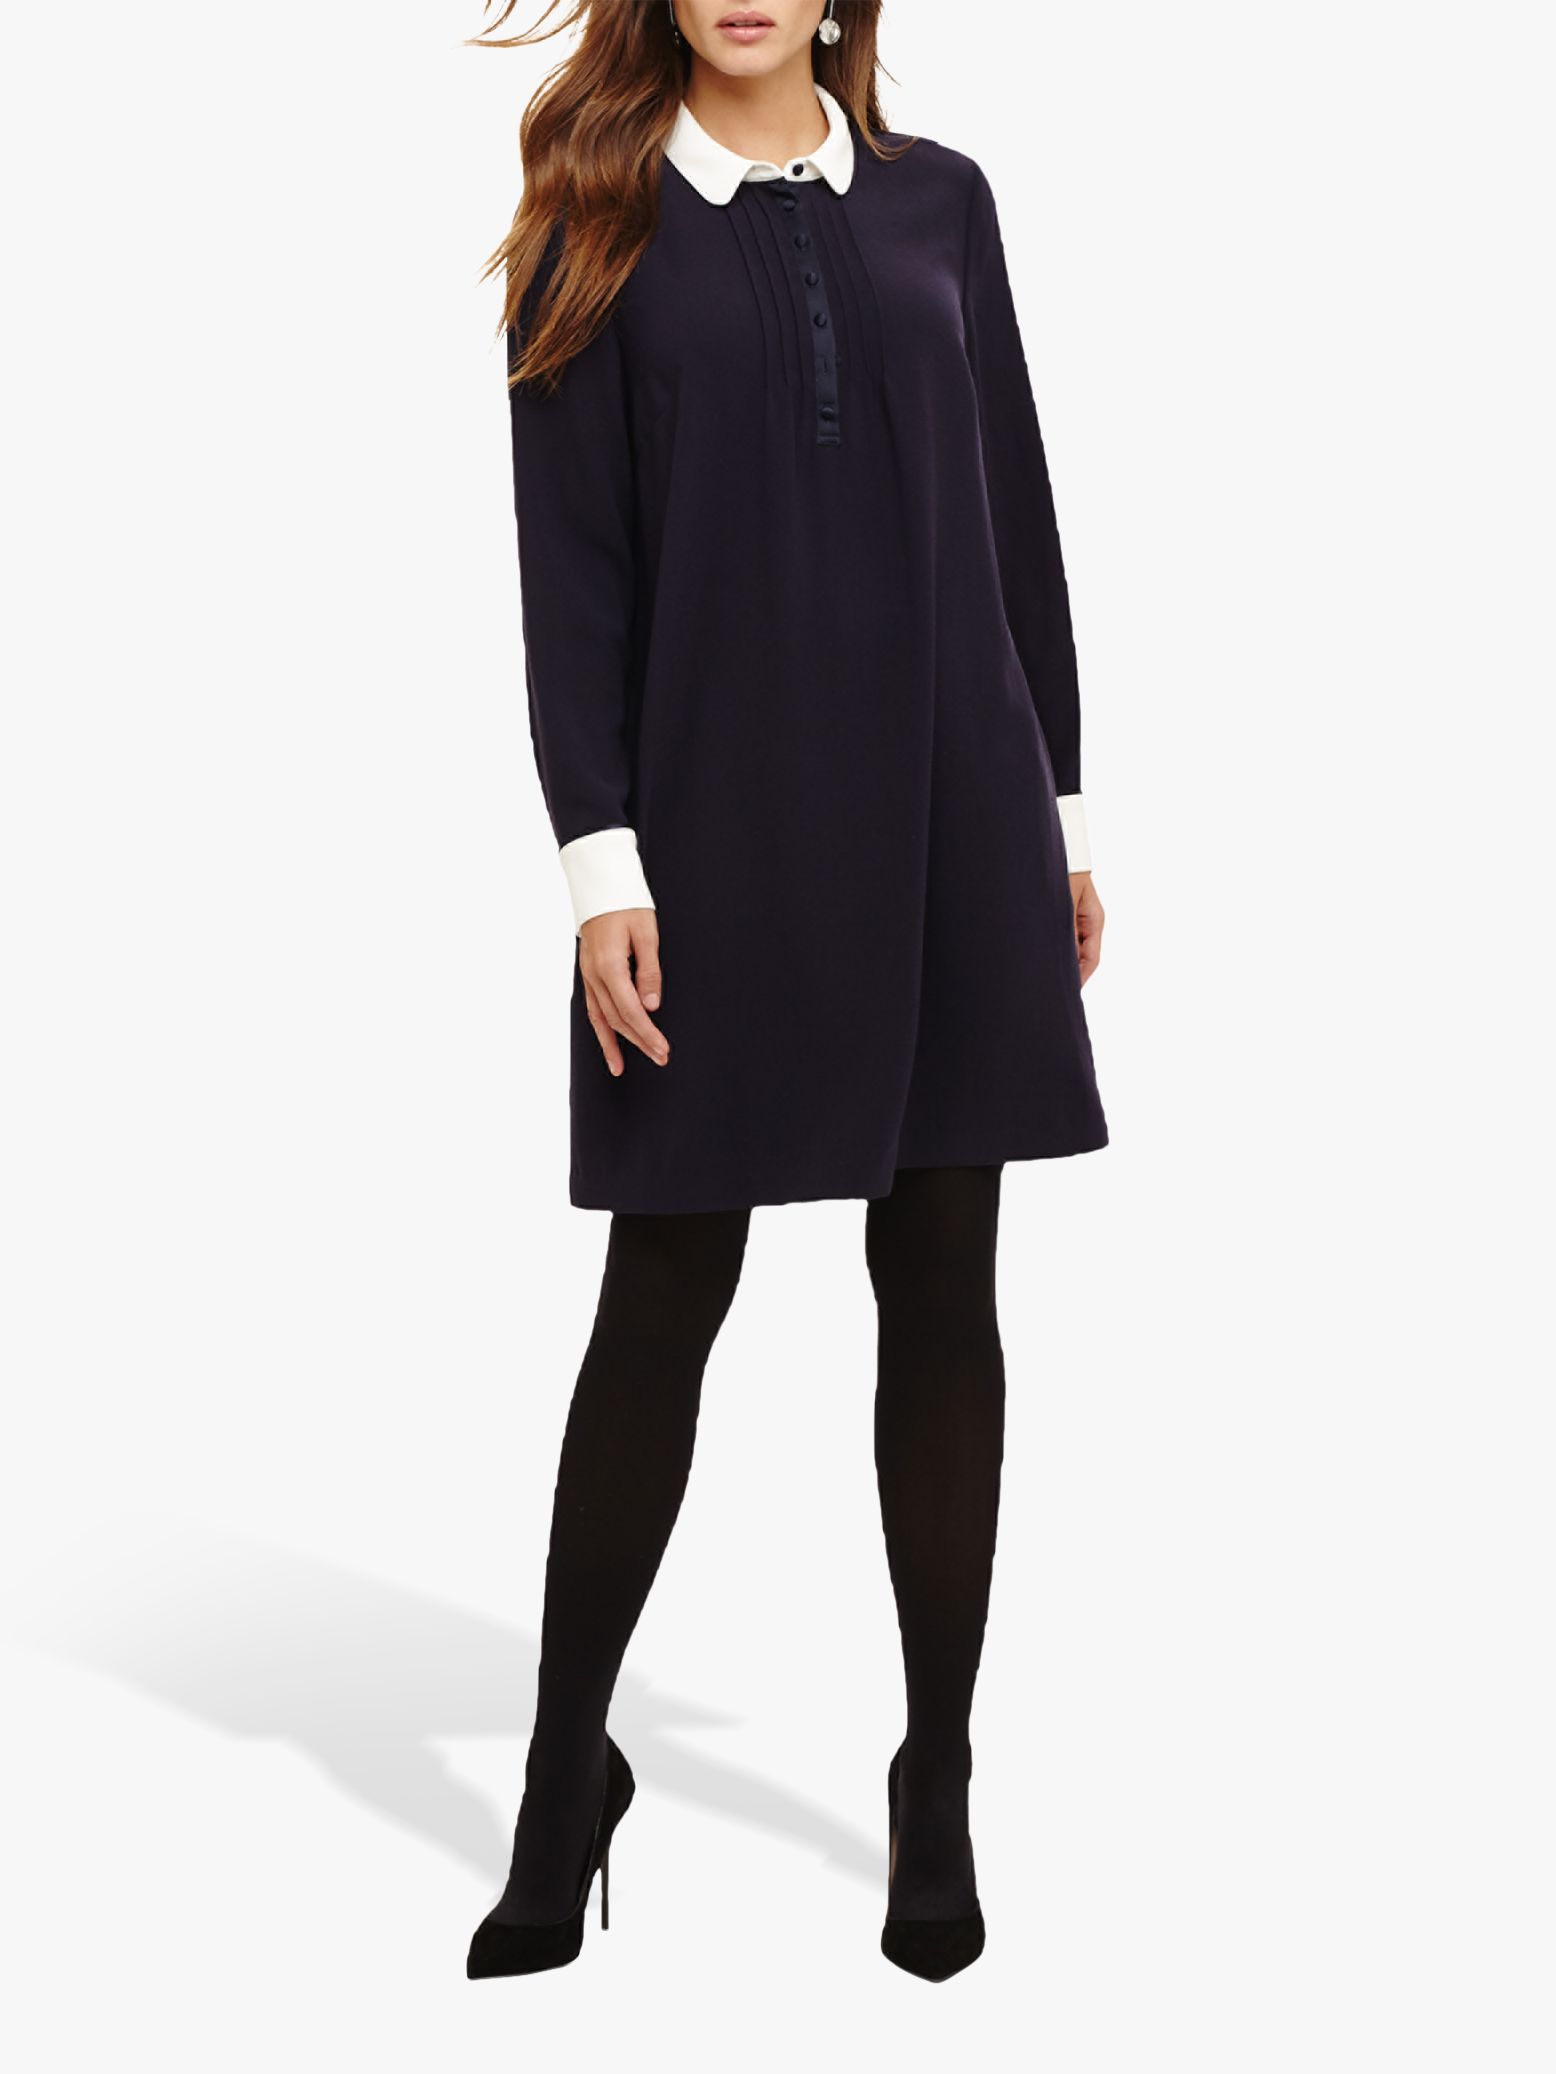 phase eight tunic sale